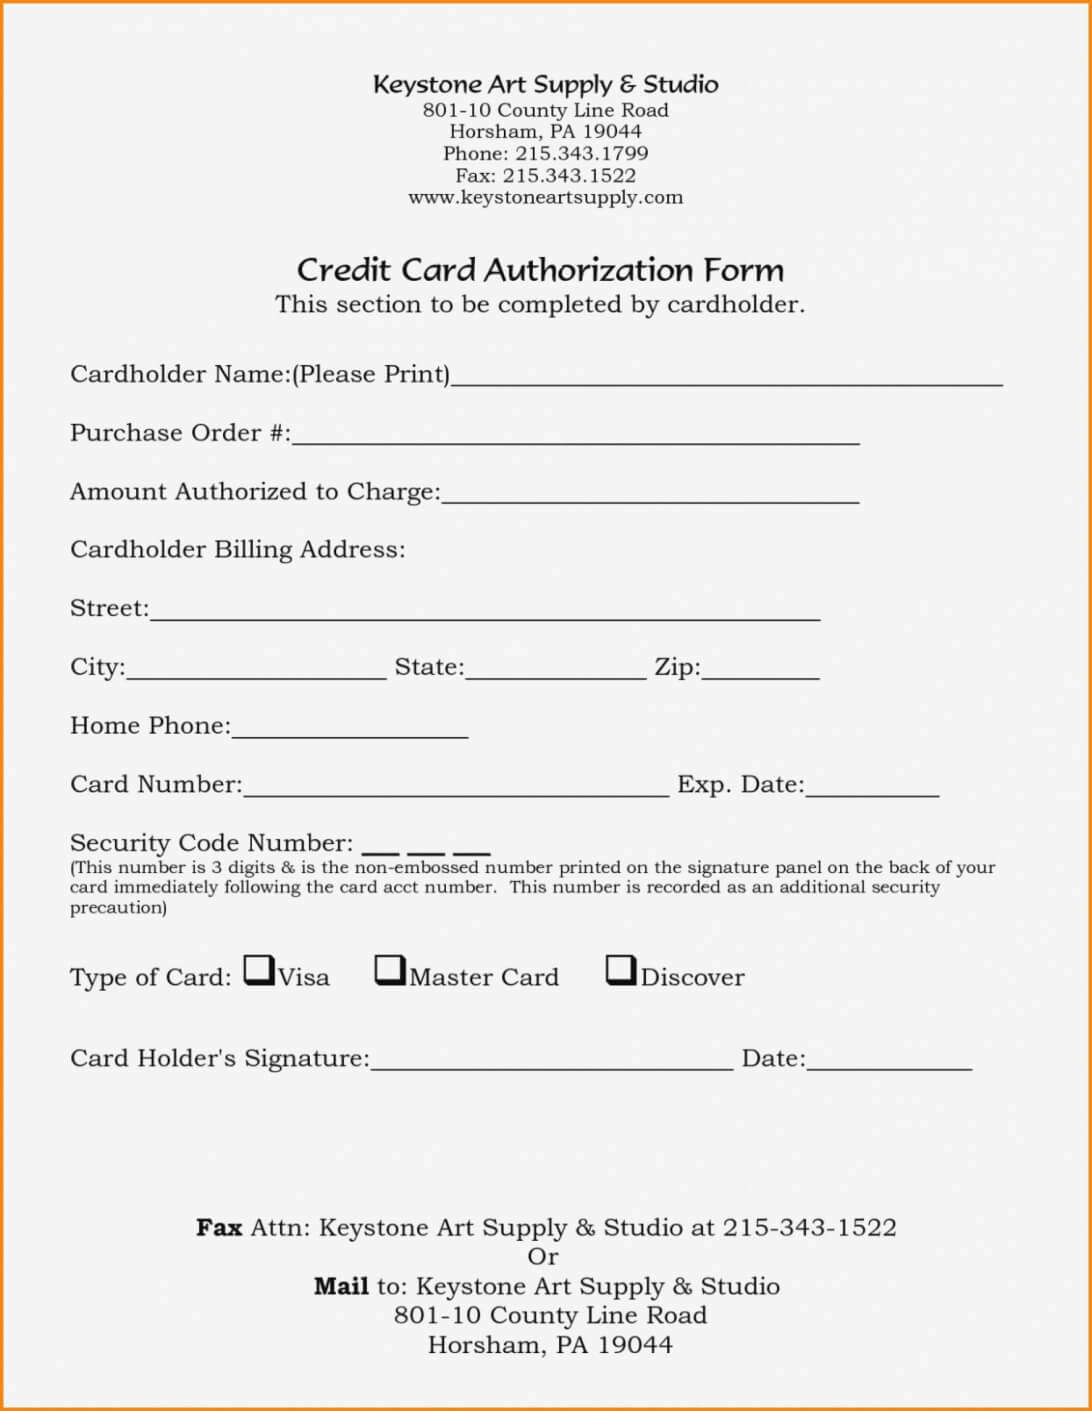 Credit Card Authorization Form Template 41 Jet Airways Uk Inside Credit Card Authorization Form Template Word